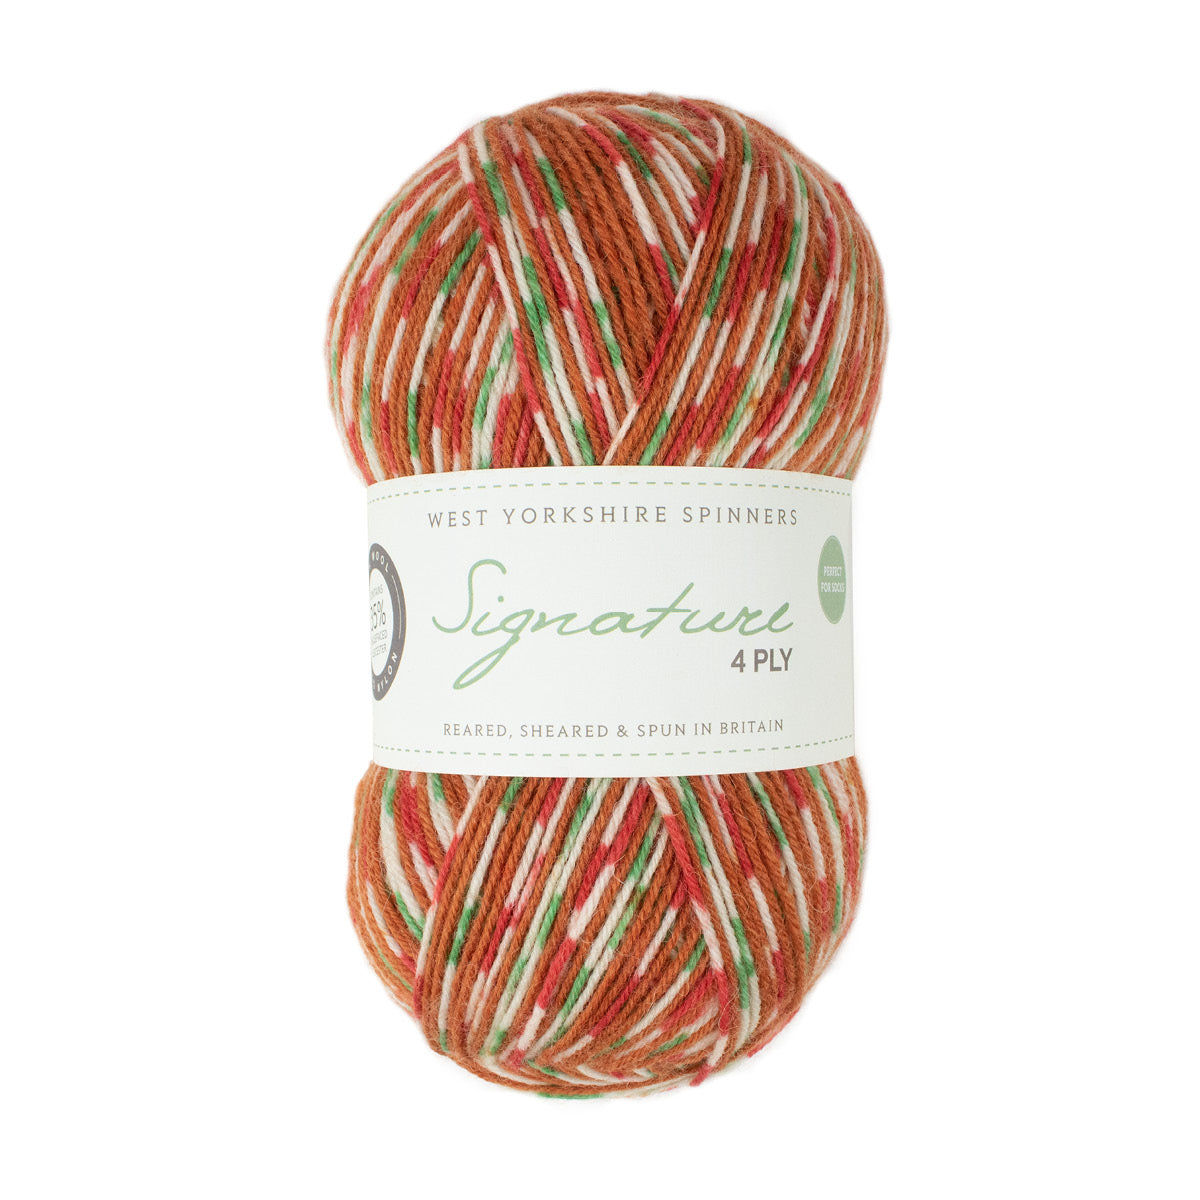 WEST YORKSHIRE SPINNERS SIGNATURE 4 PLY